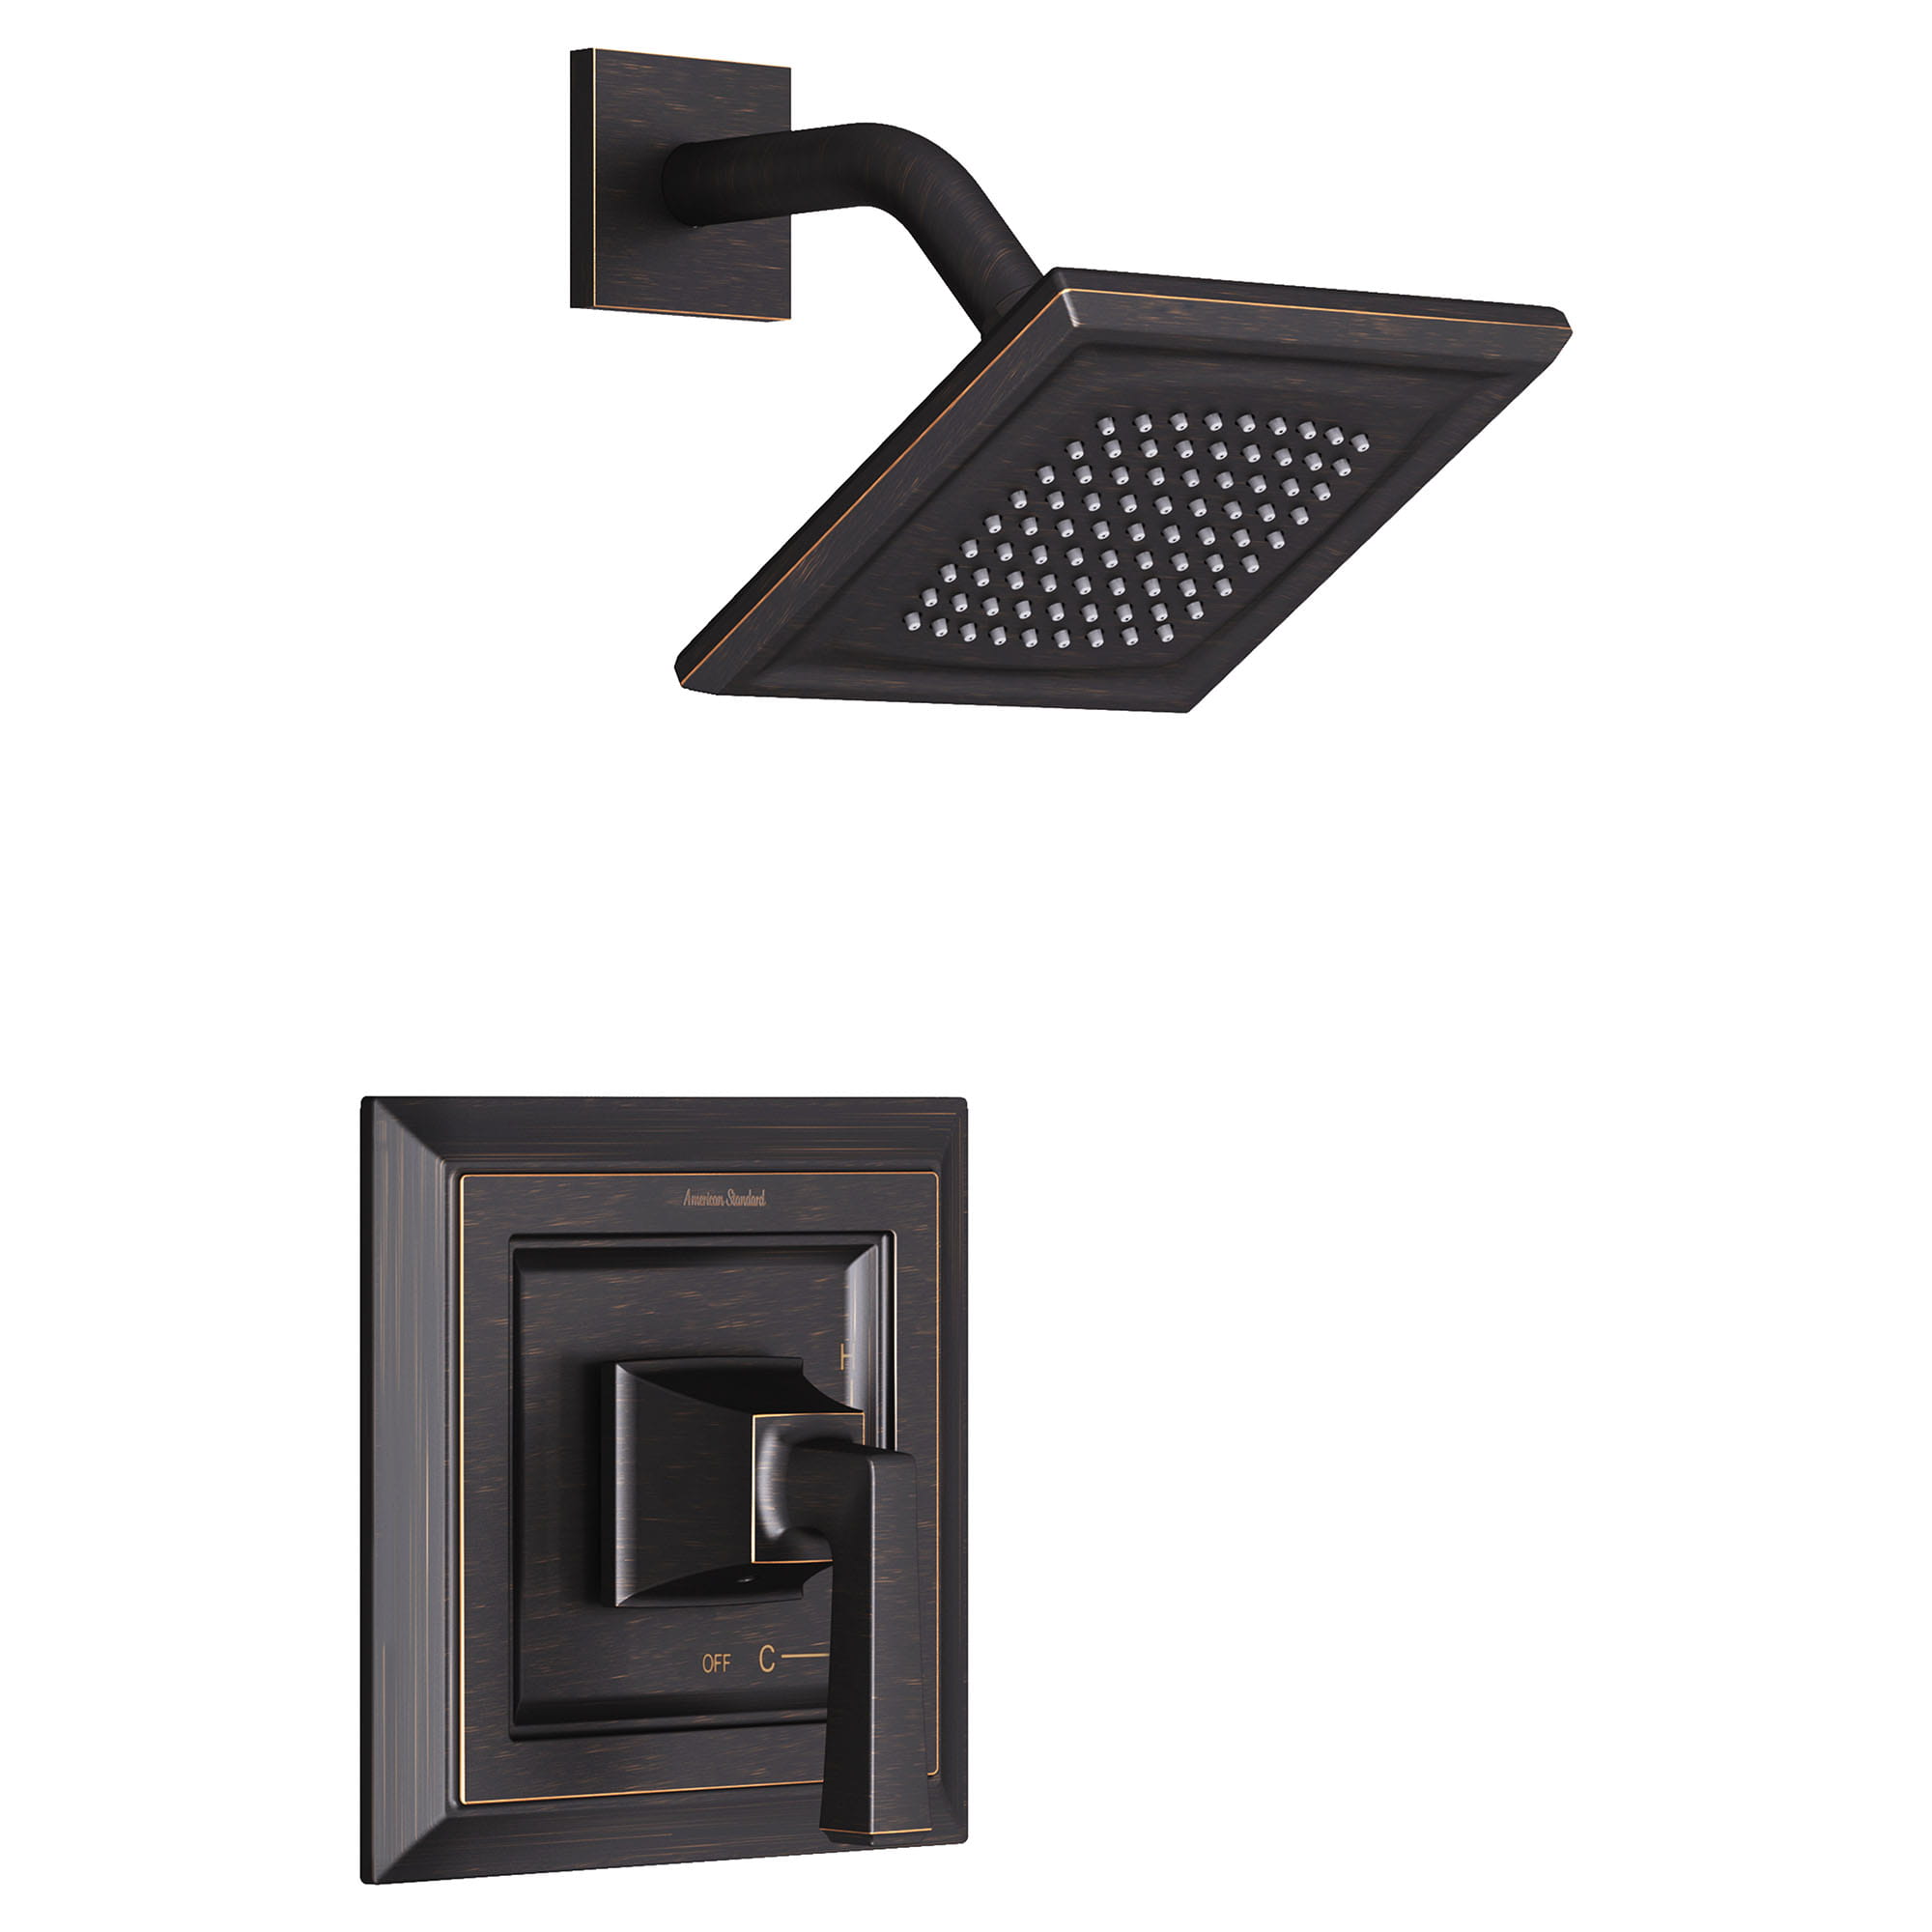 Town Square S 2.5 GPM Shower Trim Kit with Lever Handle